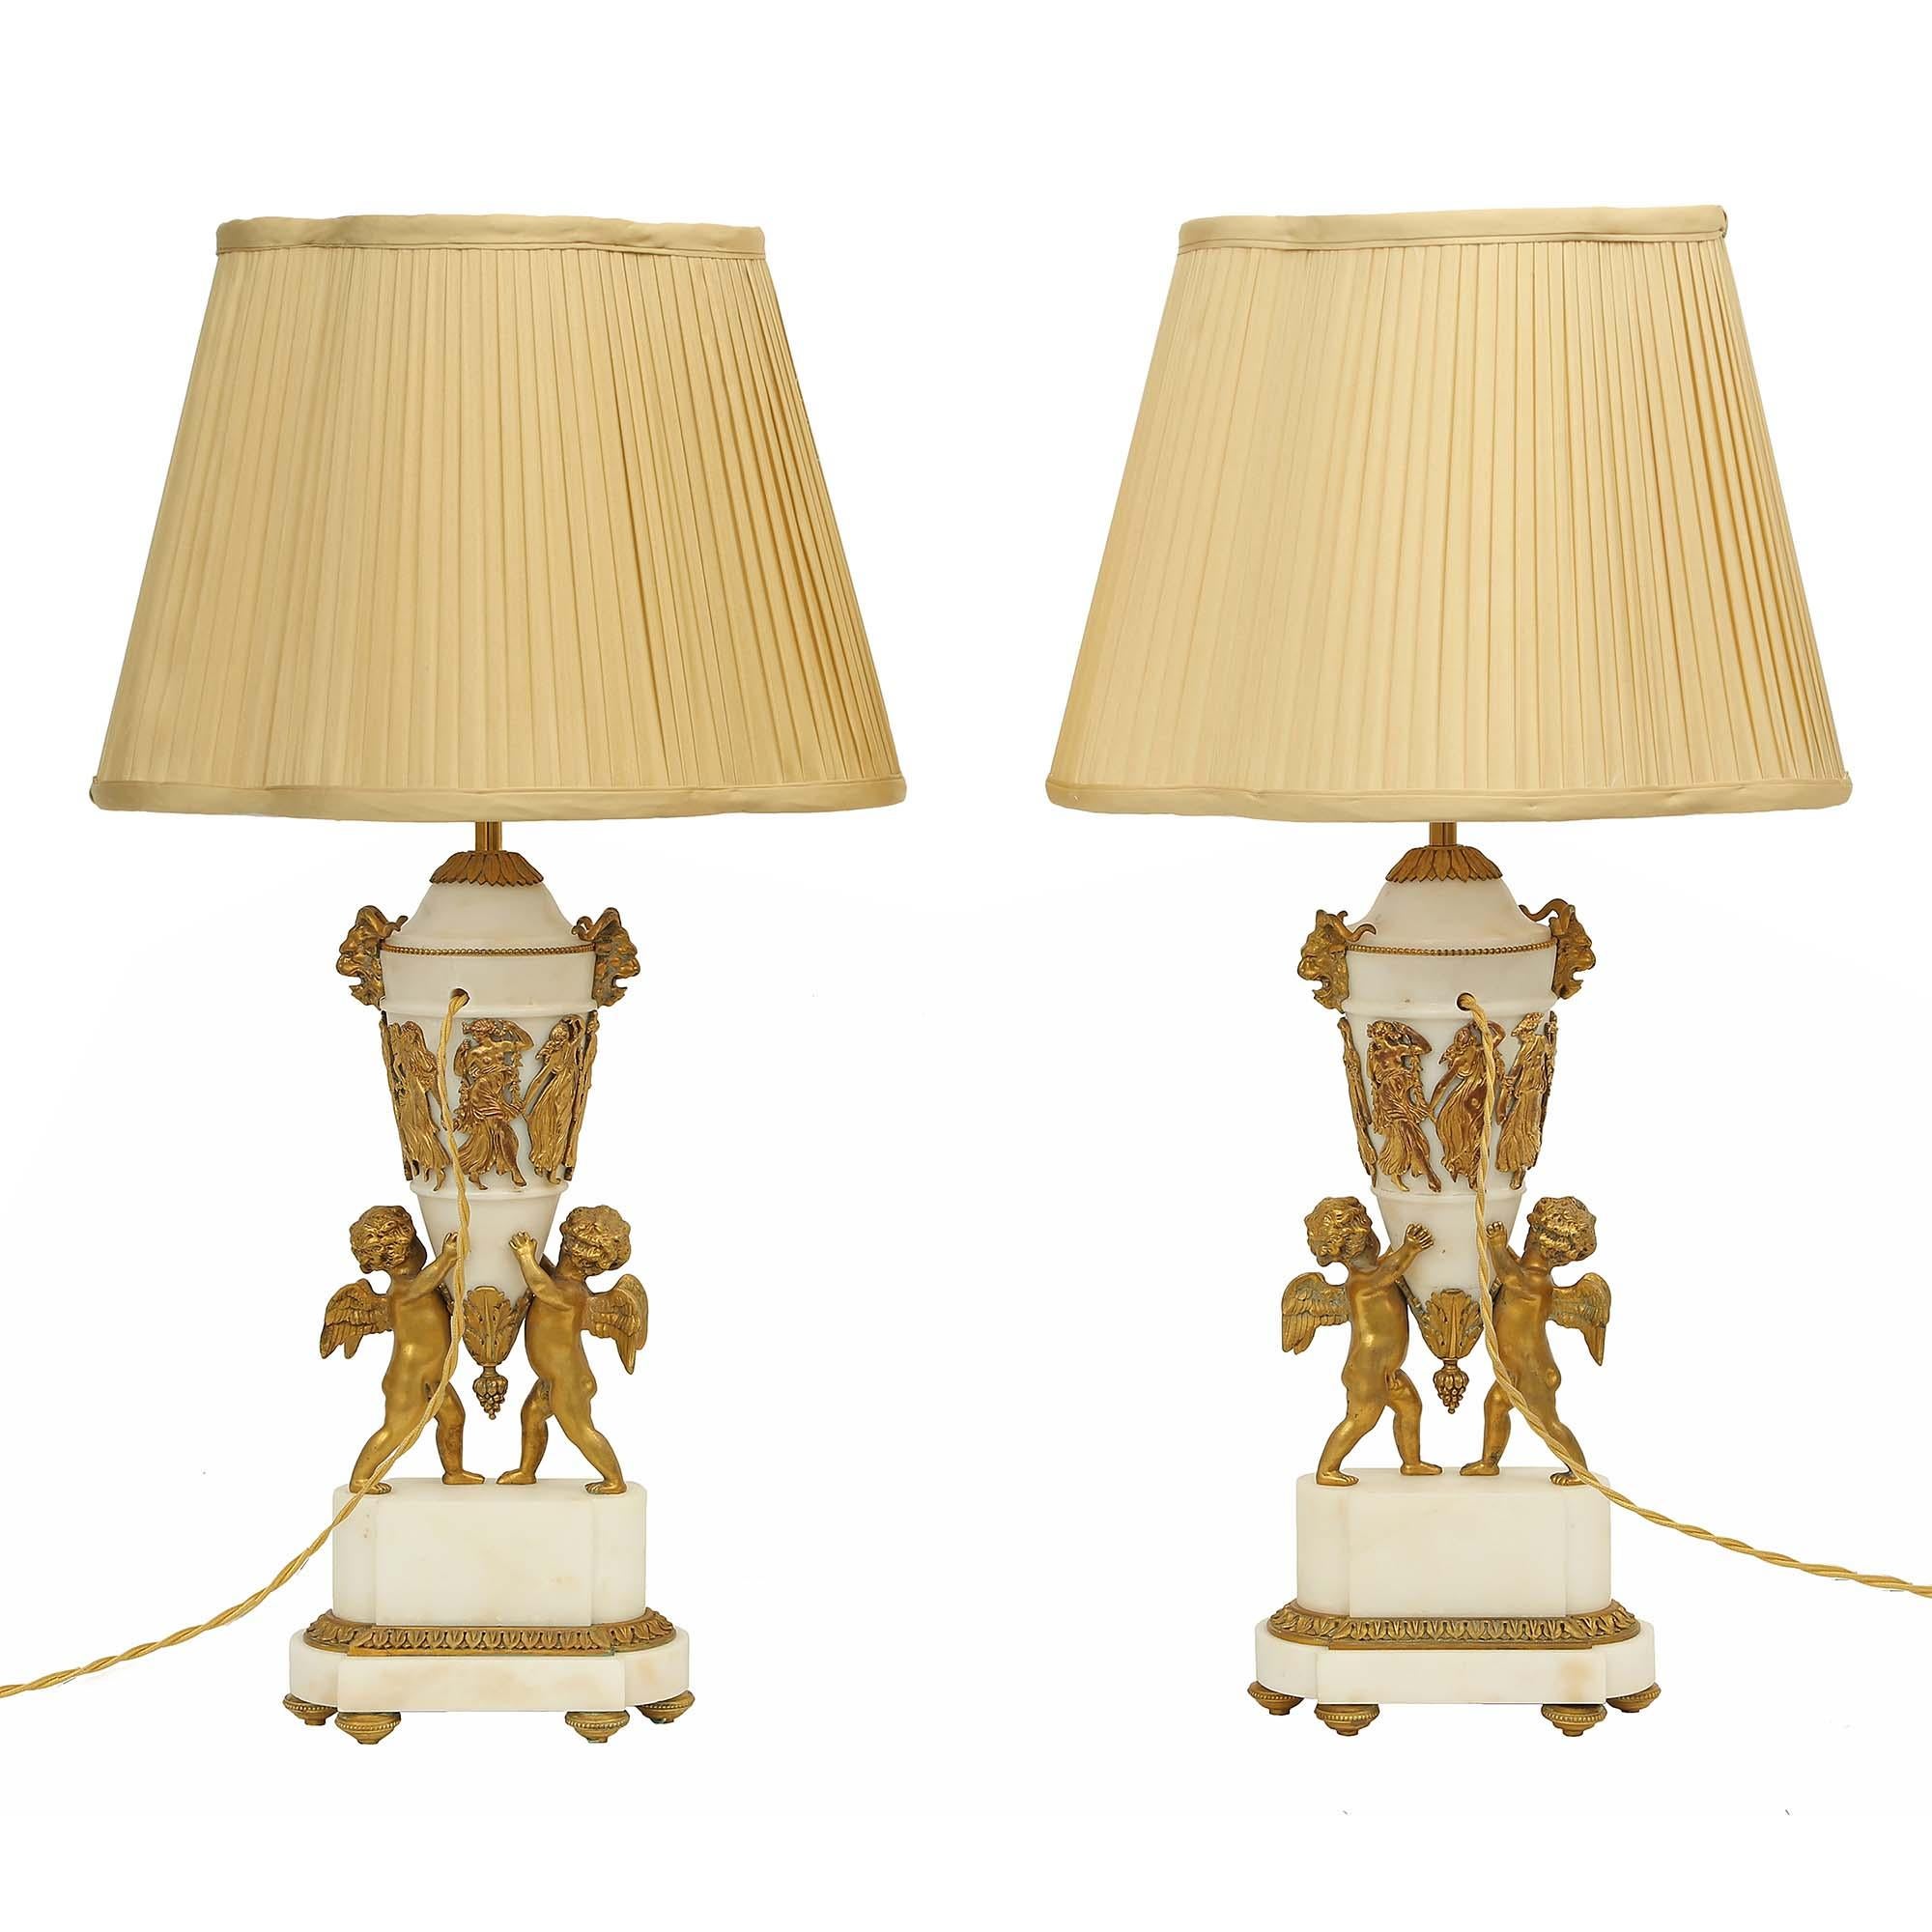 An exceptional pair of mid 19th century French Louis XVI st. white Carrara marble and ormolu urns mounted into lamps. The pair are raised by a marble base above topie shaped ormolu supports. The front of the base is decorated by an ormolu